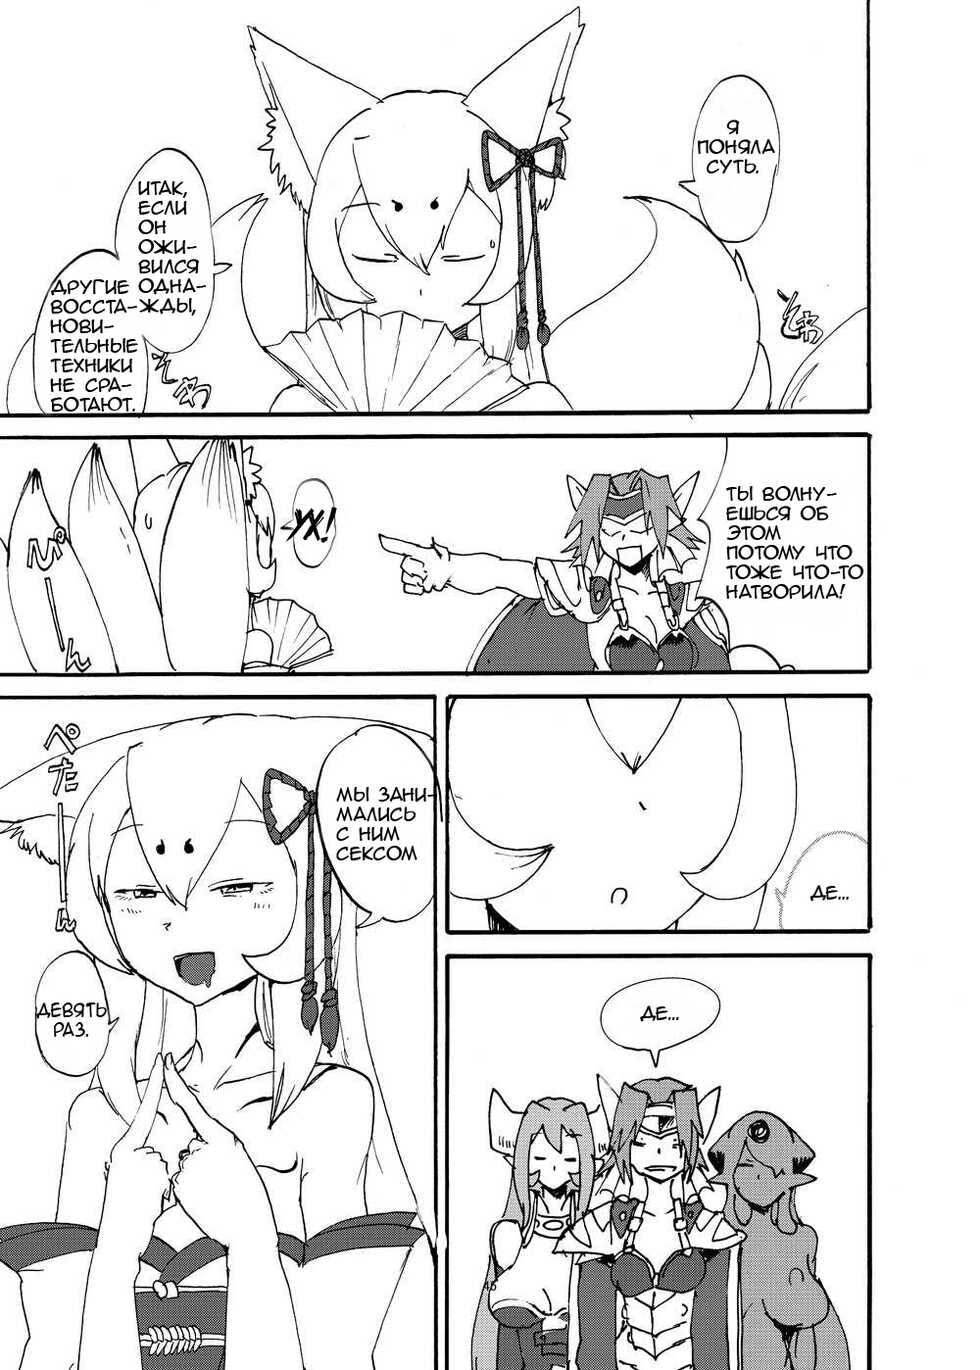 [Setouchi Pharm (Setouchi)] Fuyu no MonQue Bon (Monster Girl Quest!) 2 [Russian] [﻿stycler94] [Digital] [Incomplete] - Page 12